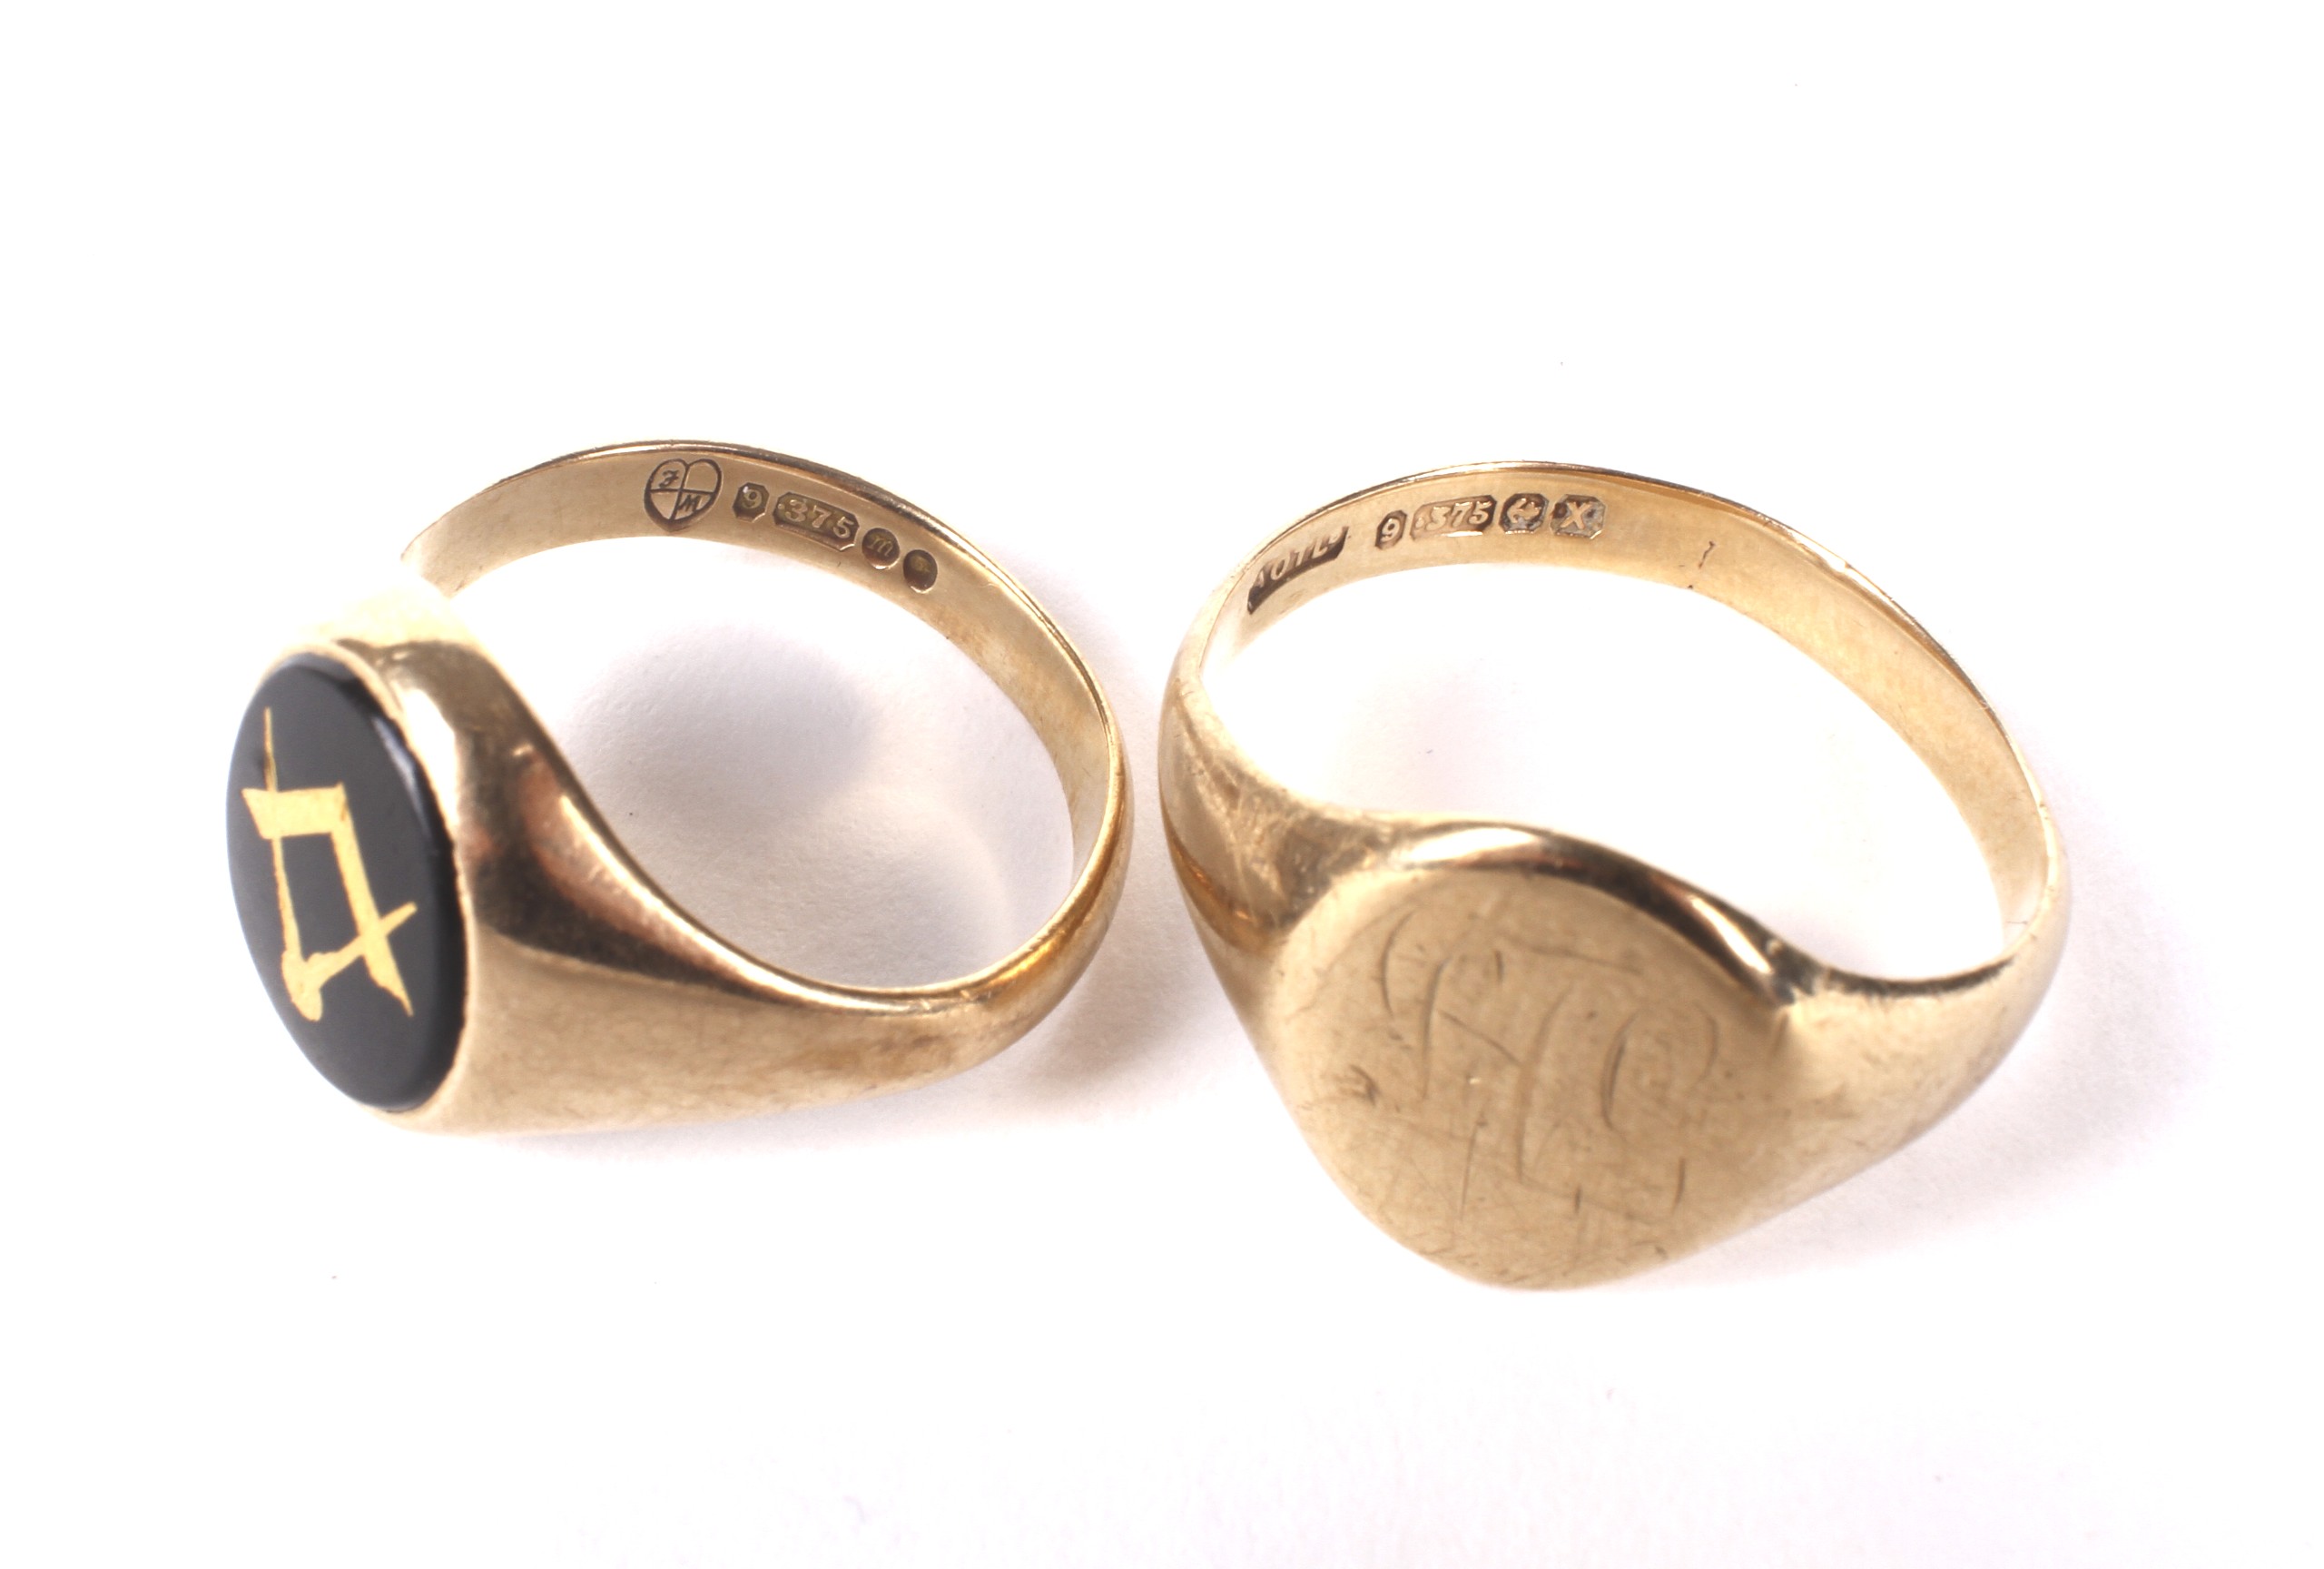 A vintage 9ct gold and black onyx 'masonic' signet ring and another signet ring. - Image 3 of 3